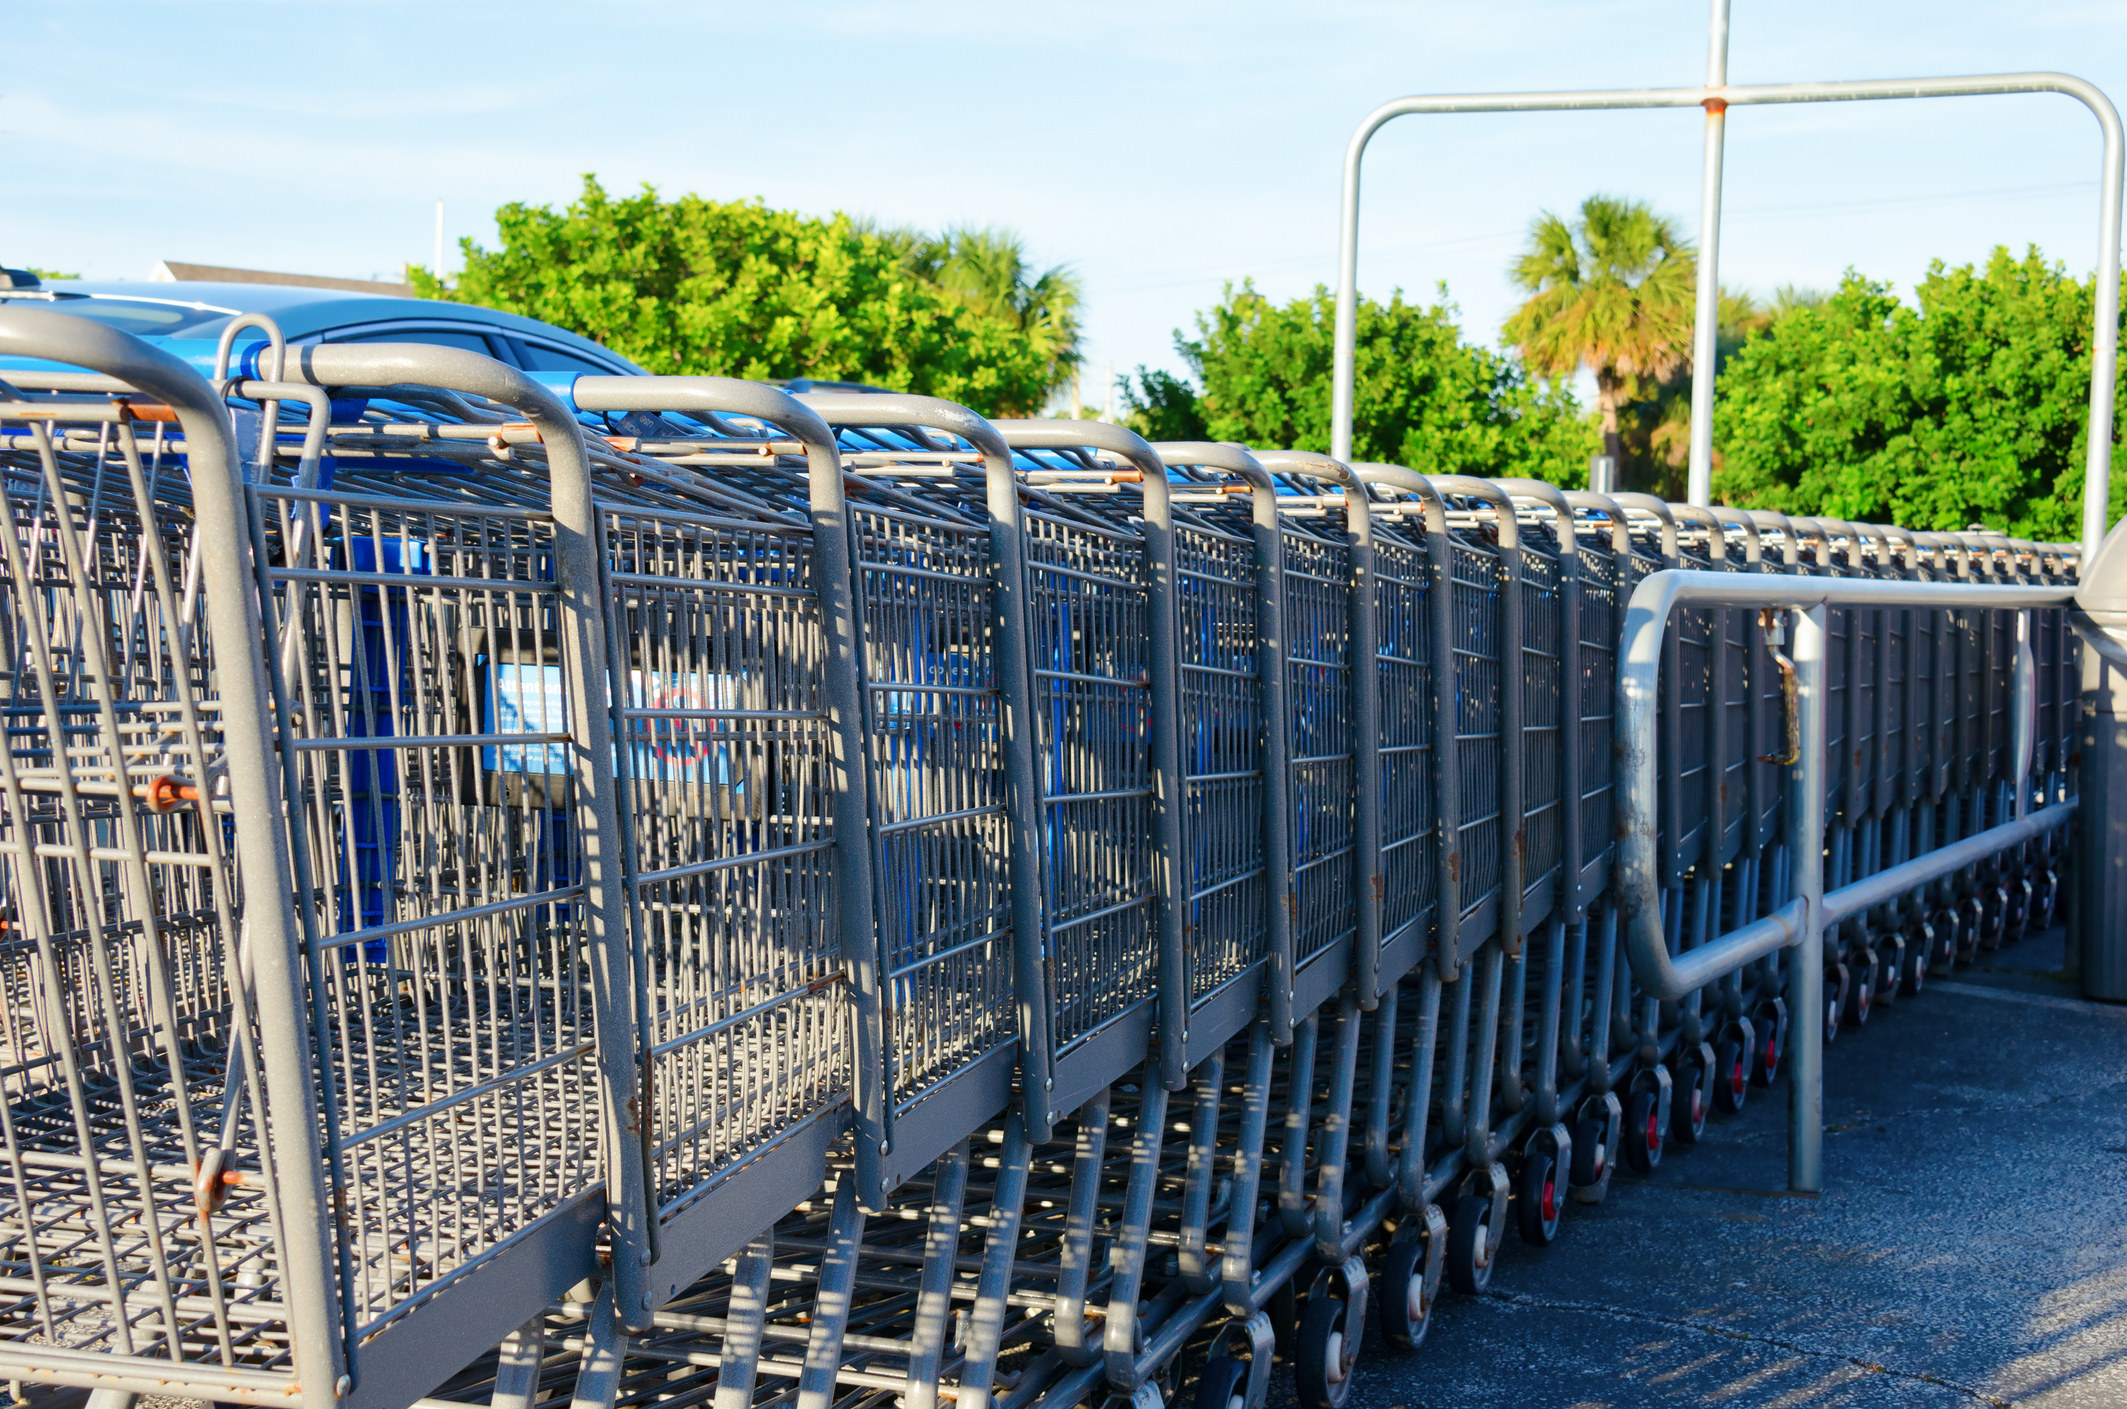 Carts at a grocery store parking lot